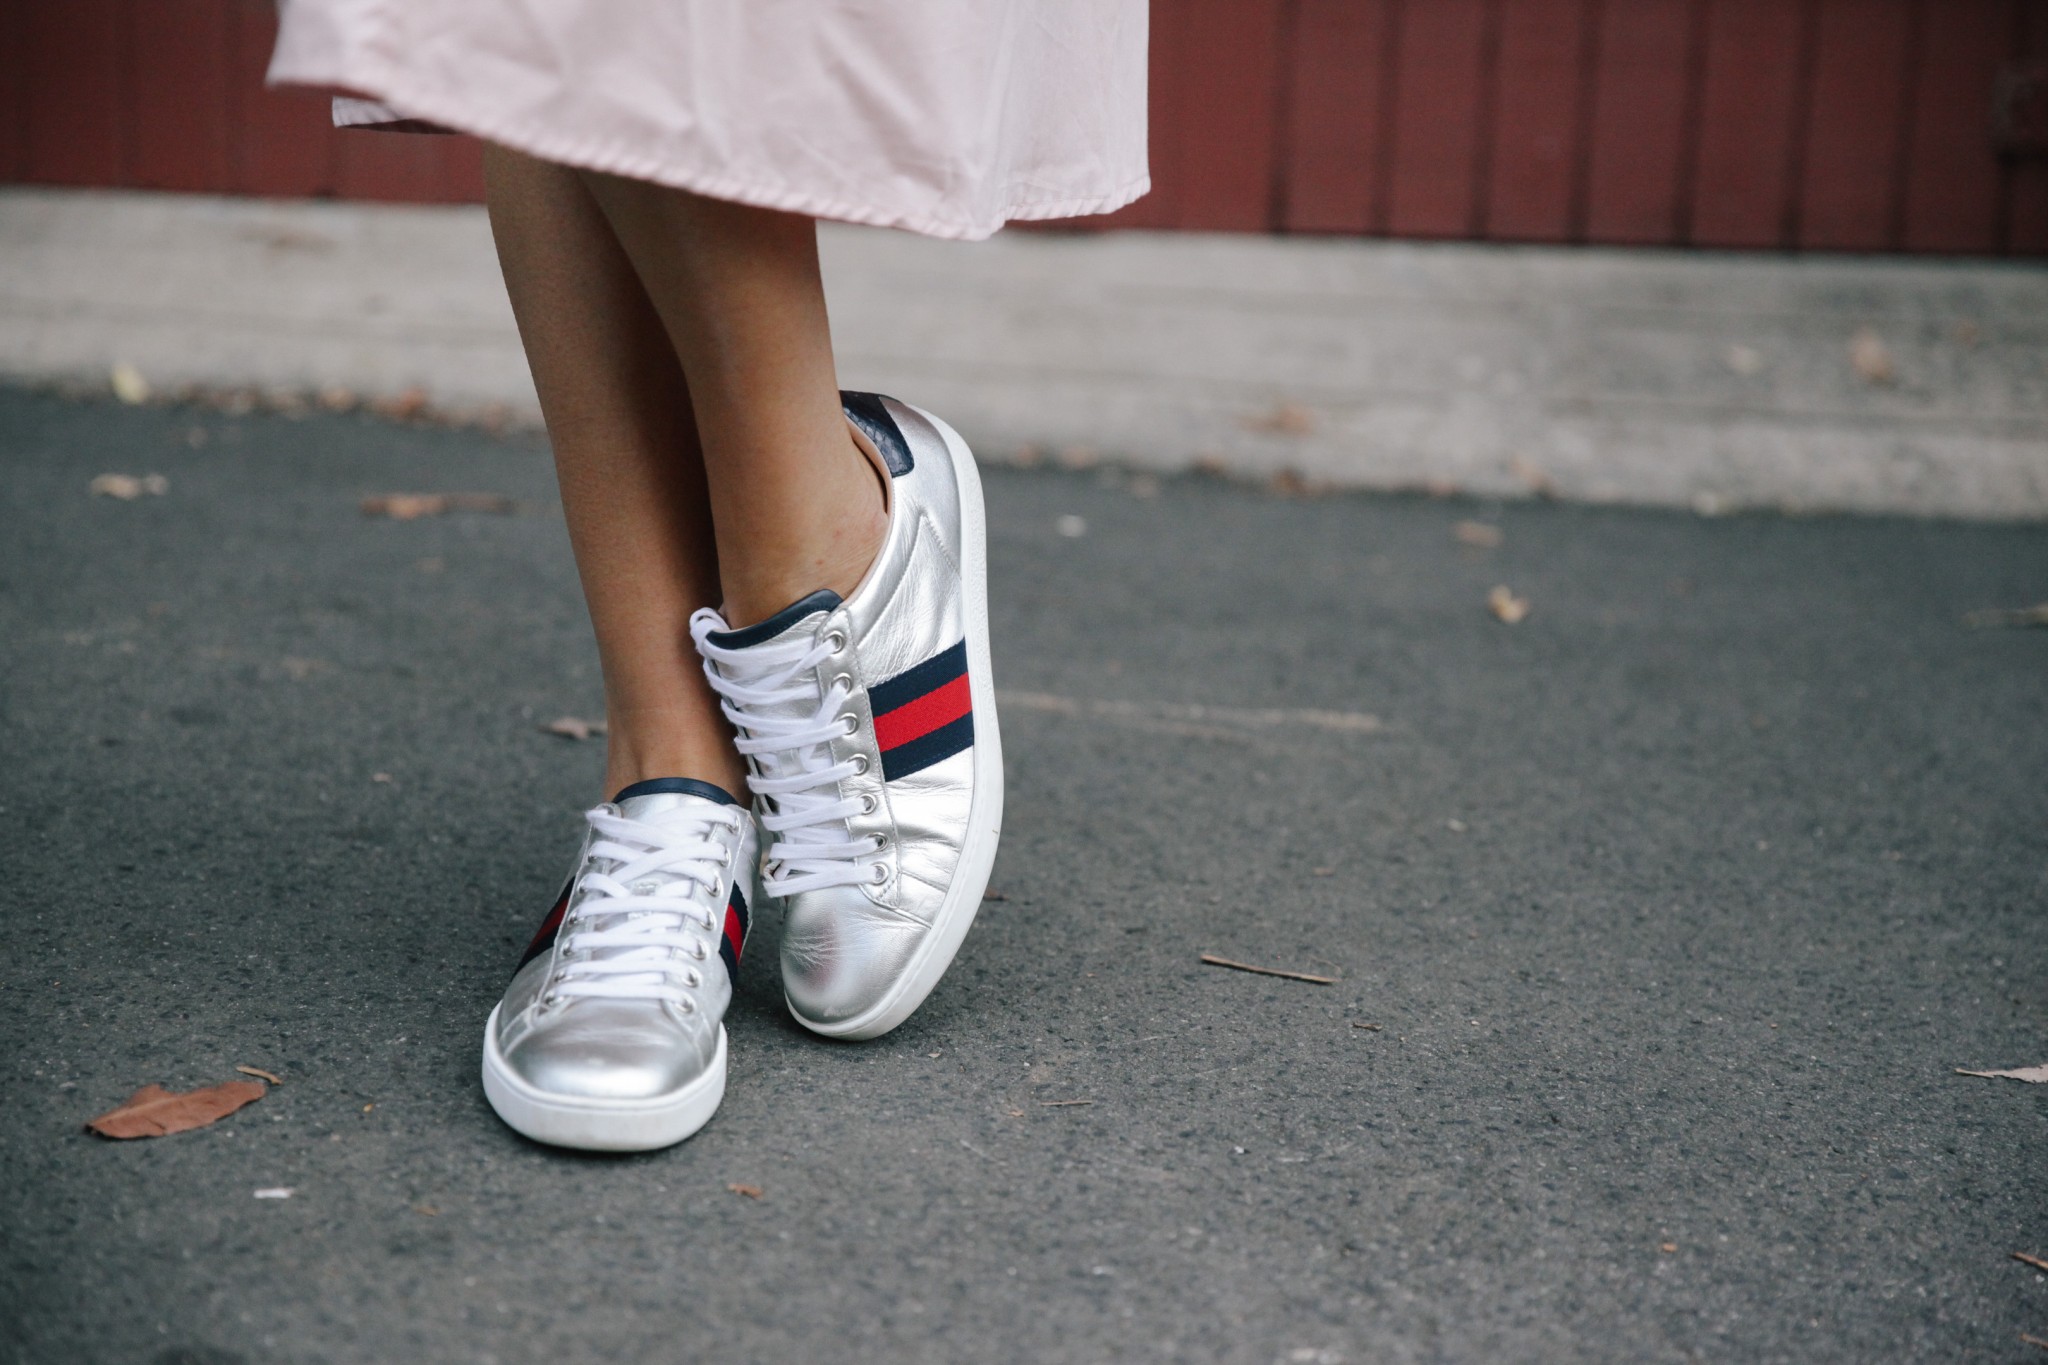 Metallic sneakers are your stylish new 